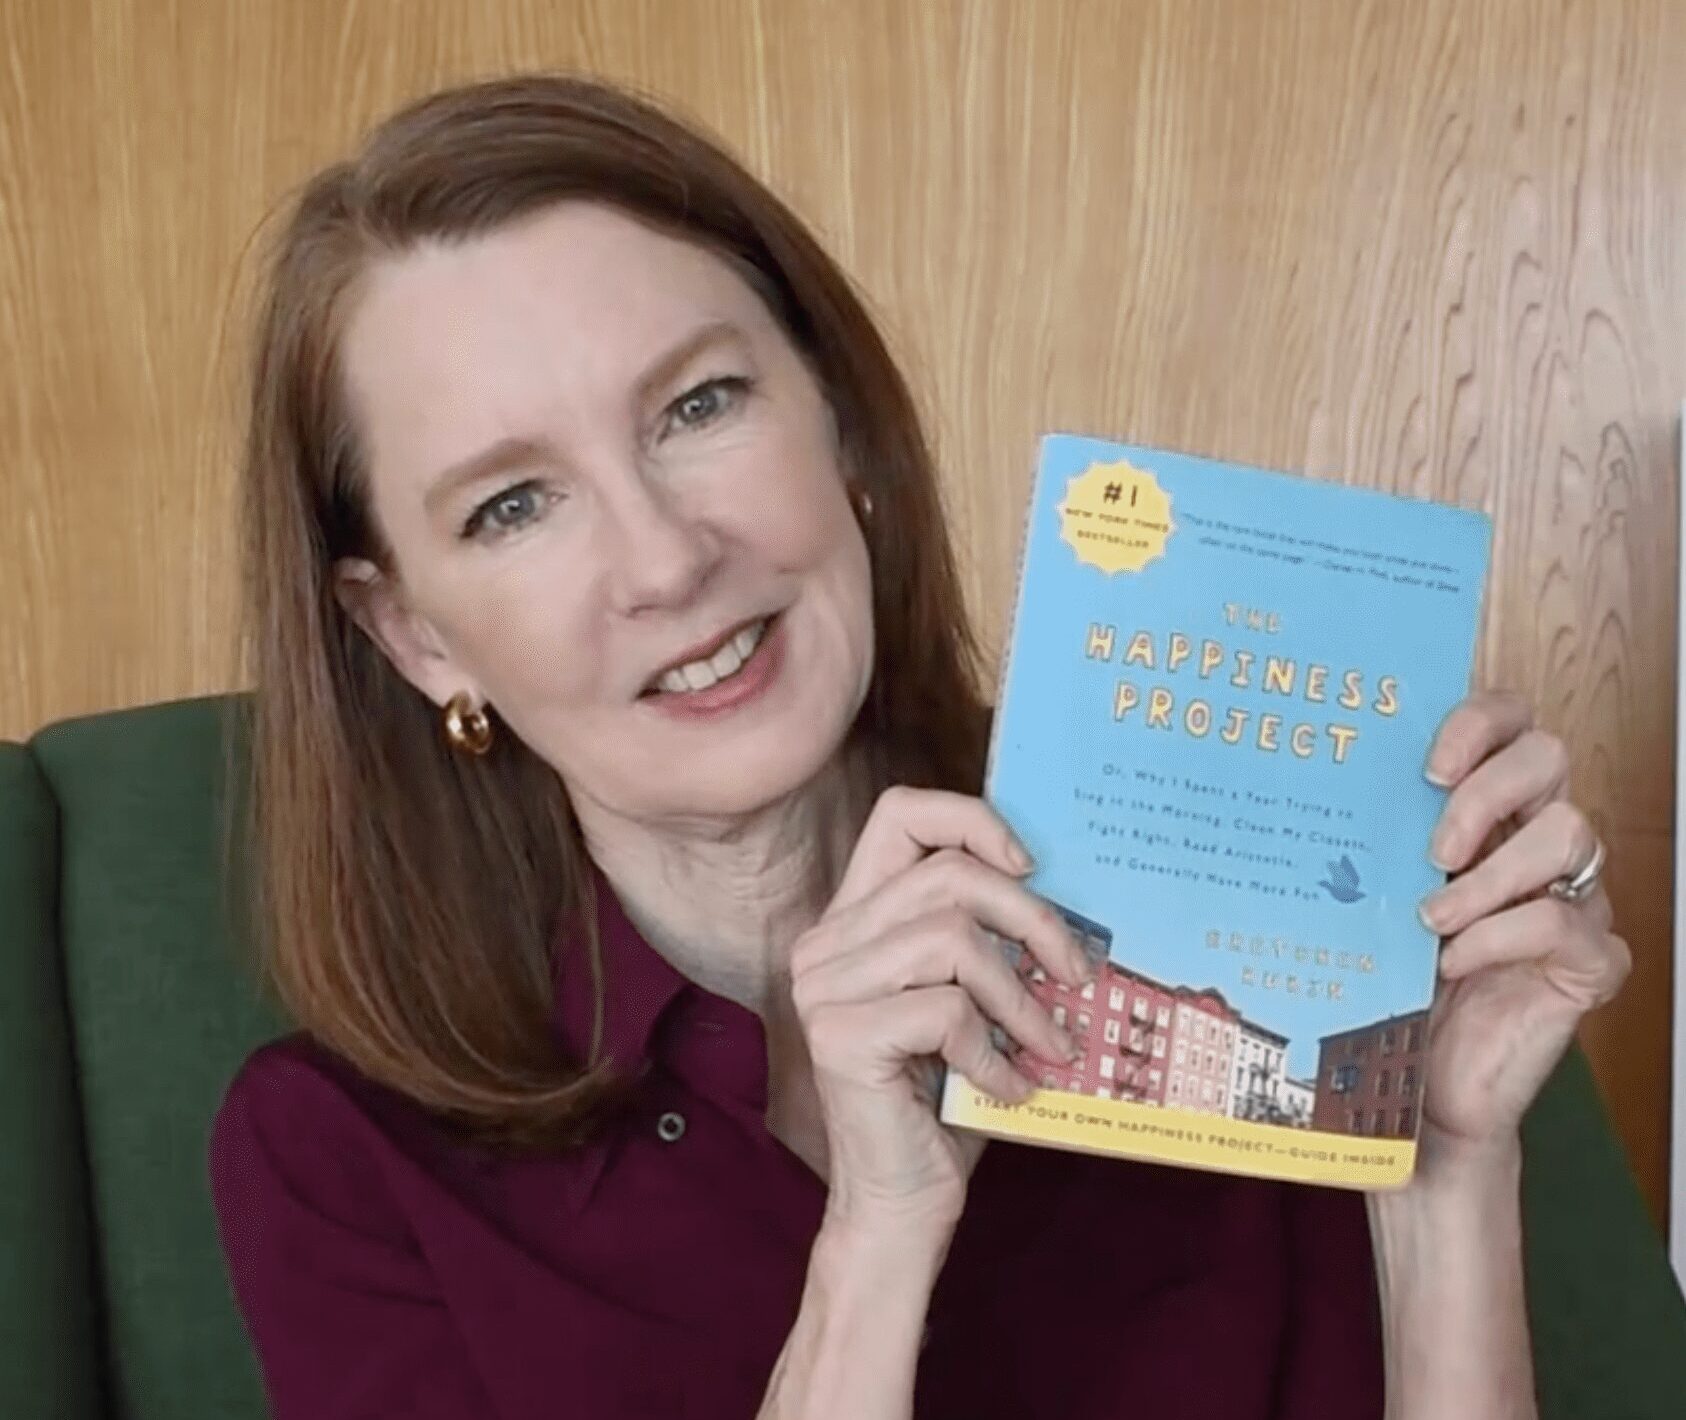 Gretchen Rubin holding her book The Happiness Project